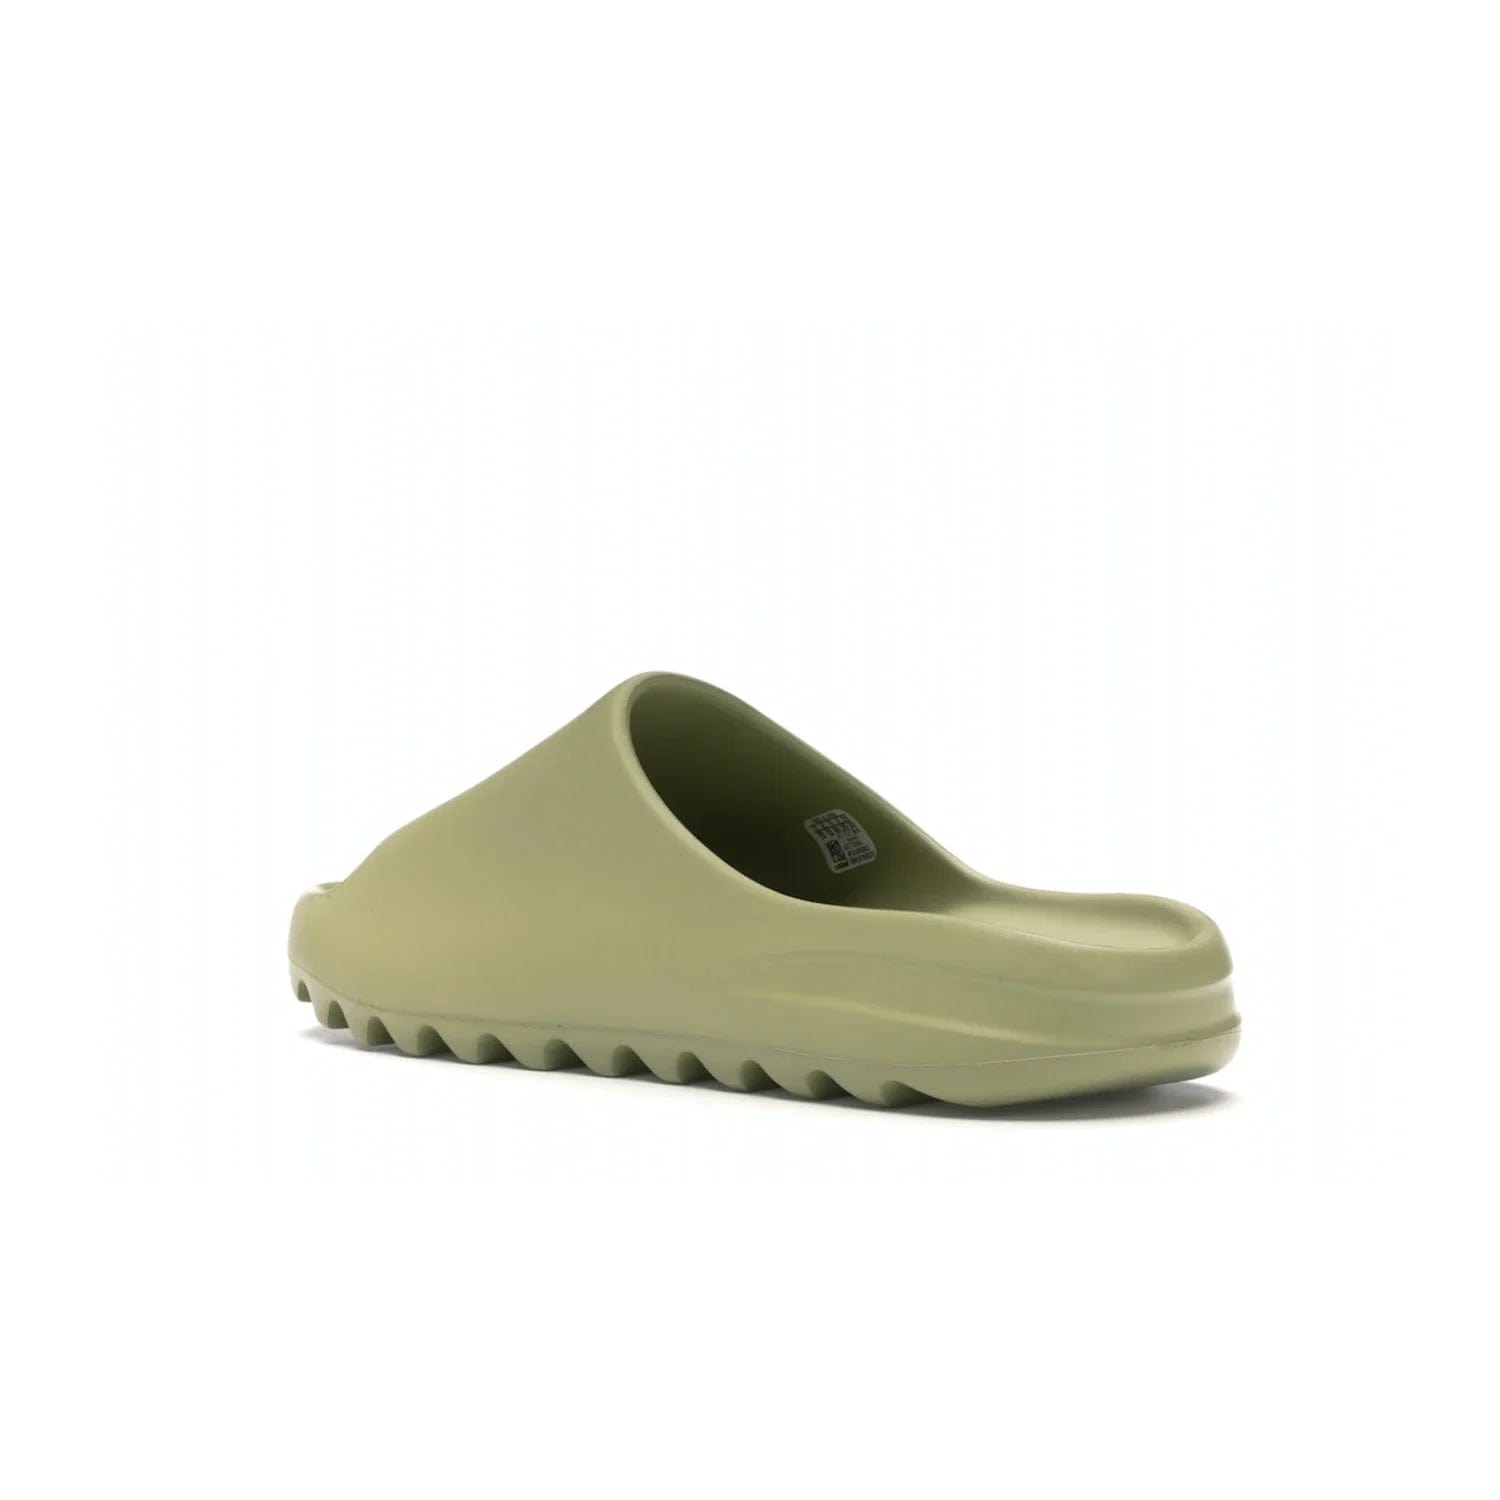 adidas Yeezy Slide Resin (2019/2021) - Image 24 - Only at www.BallersClubKickz.com - Step into fashion and function with the adidas Yeezy Slide Resin. Featuring a lightweight Resin EVA foam construction and an outsole with accentuated grooves for traction and support. The latest release is available in a Resin/Resin/Resin colorway, combining modern aesthetics and classic style. Step into style with the adidas Yeezy Slide Resin and be the trend-setter this season.